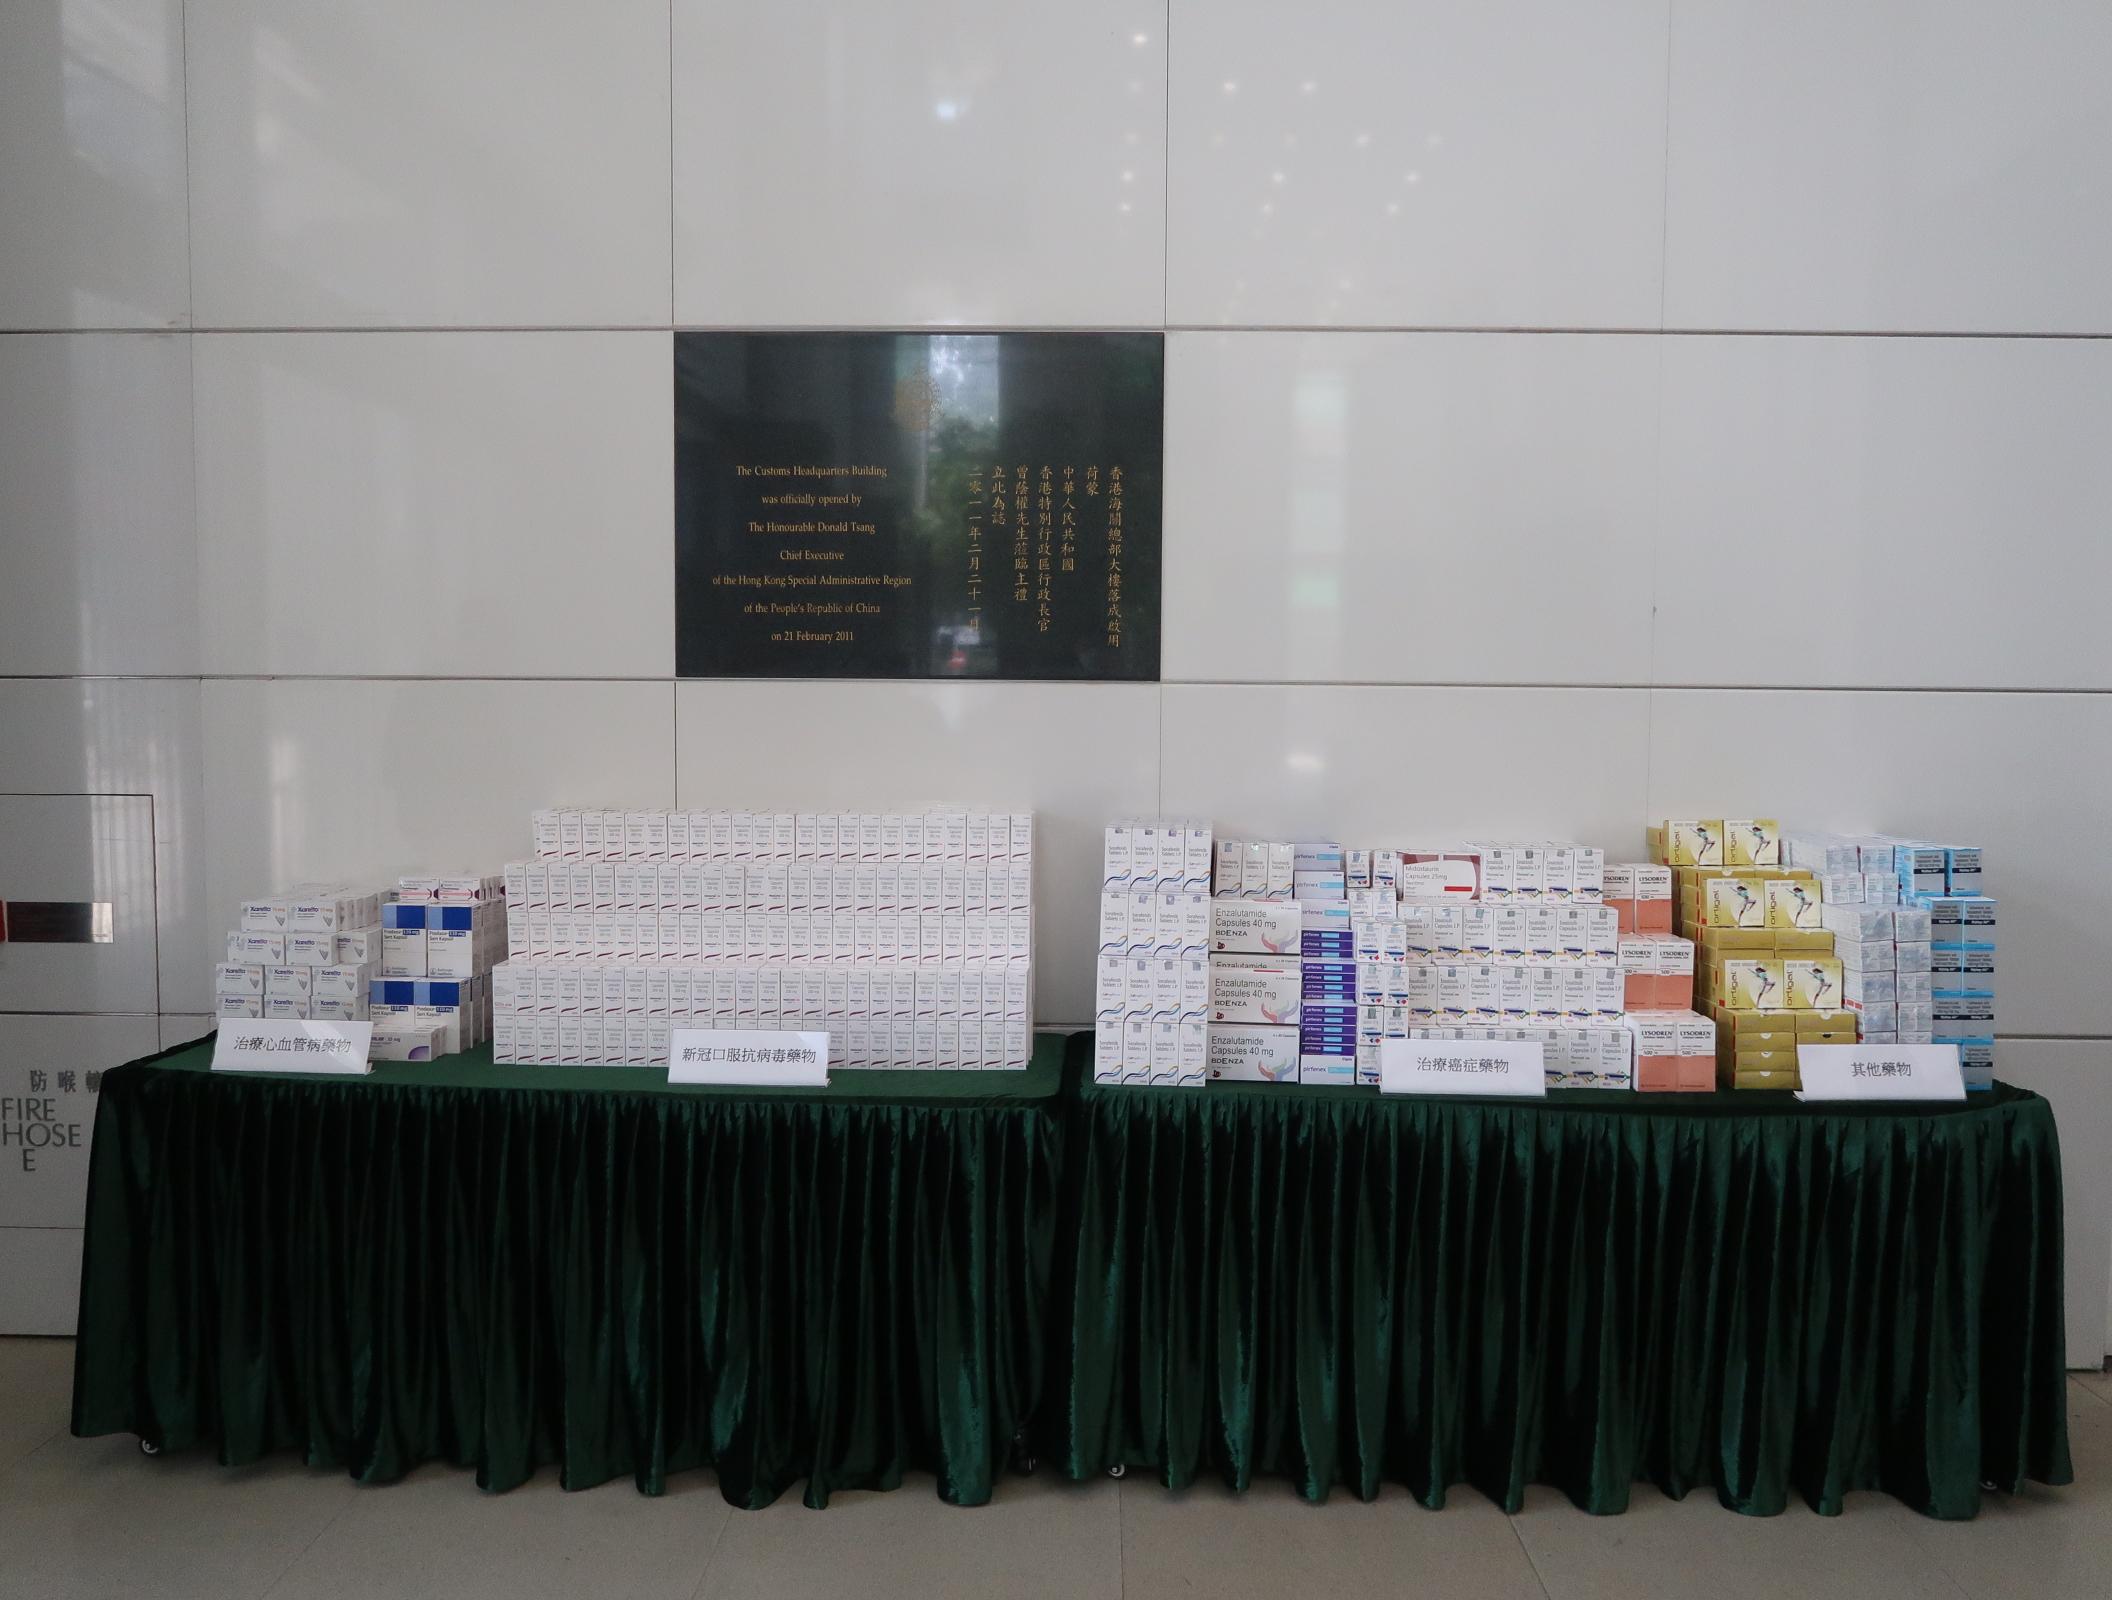 Hong Kong Customs seized a total of about 117 000 tablets and 900 vials of suspected controlled medicines with an estimated market value of about $3 million at Hong Kong International Airport and in Sheung Shui from March 21 to April 1. Photo shows the suspected controlled medicines seized, which are in three major categories, namely COVID-19 oral drugs, drugs for curing cardiovascular diseases and drugs for curing cancer.